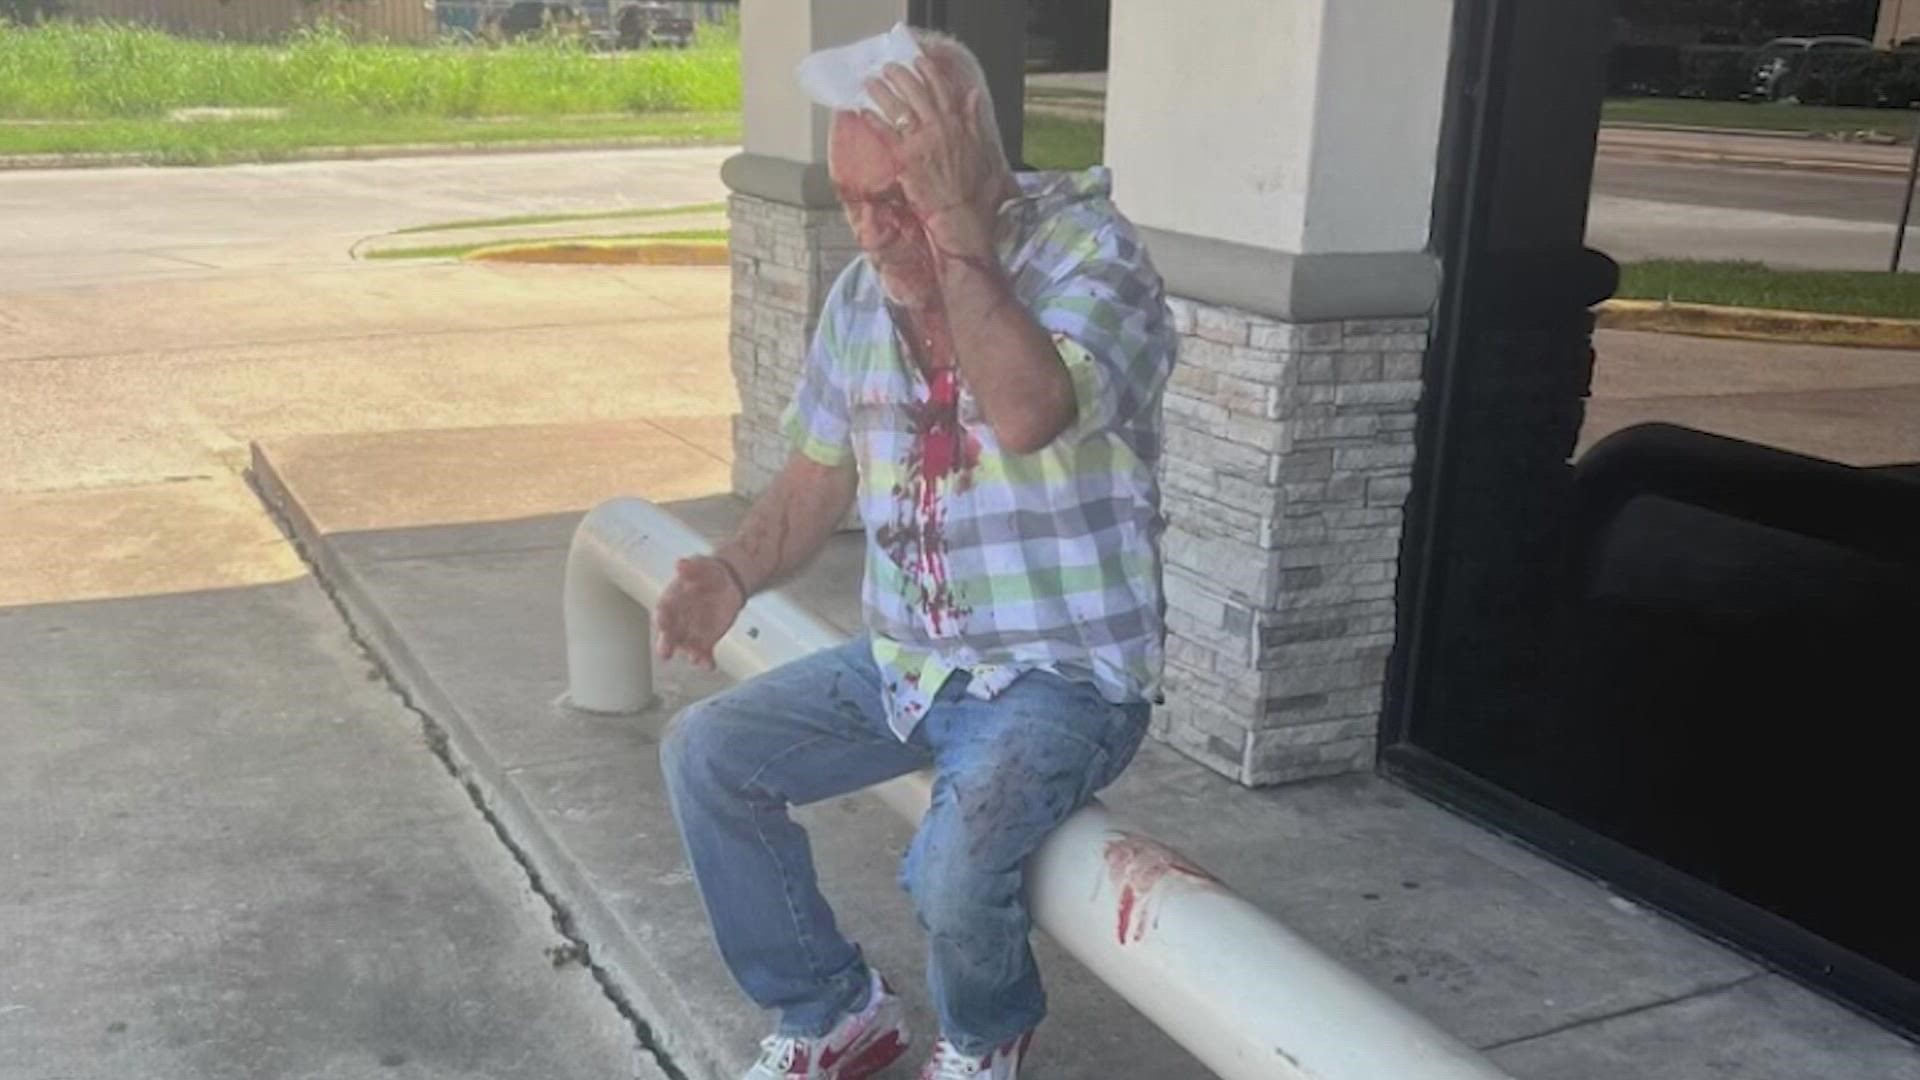 The Houston grandpa of 11 was forced out of his truck and pistol-whipped when he stopped to help a woman being robbed. He punched the robber before he got away.